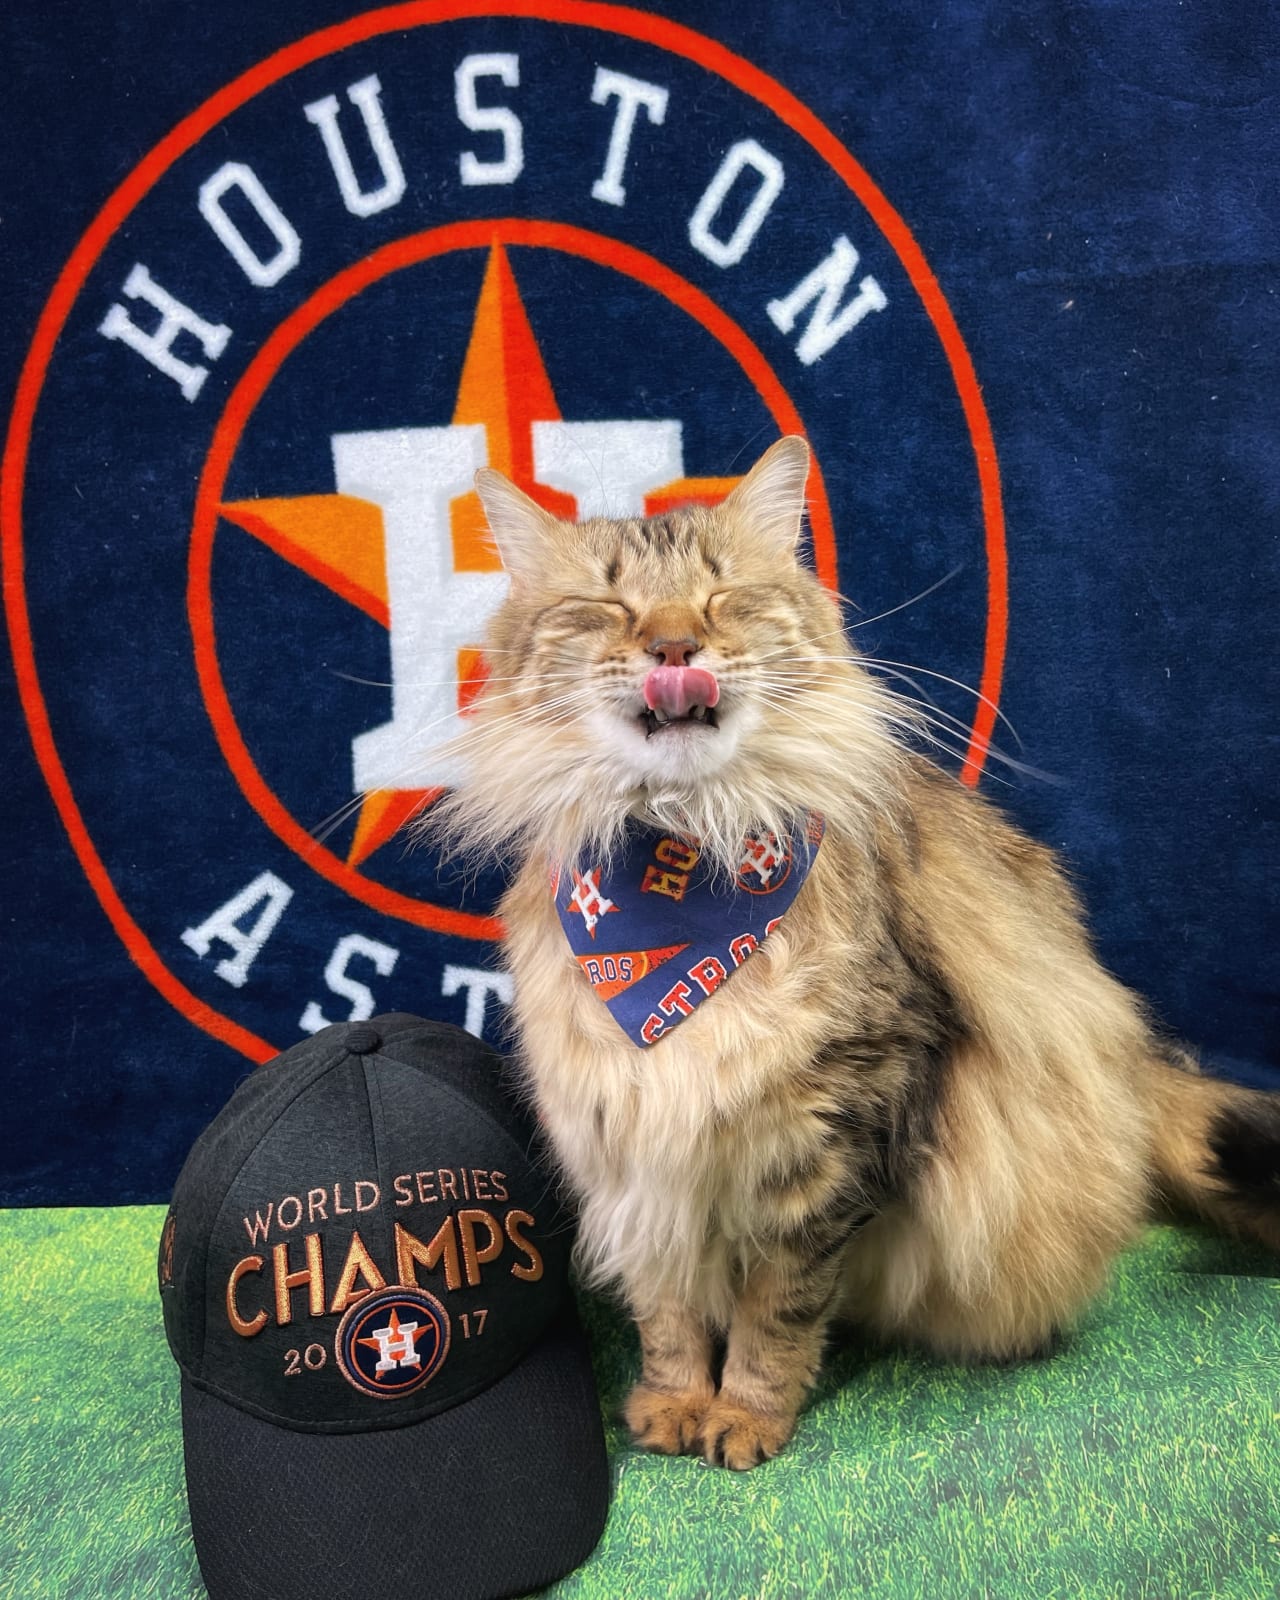 What Has More Lives: The Houston Astros or a Cat?